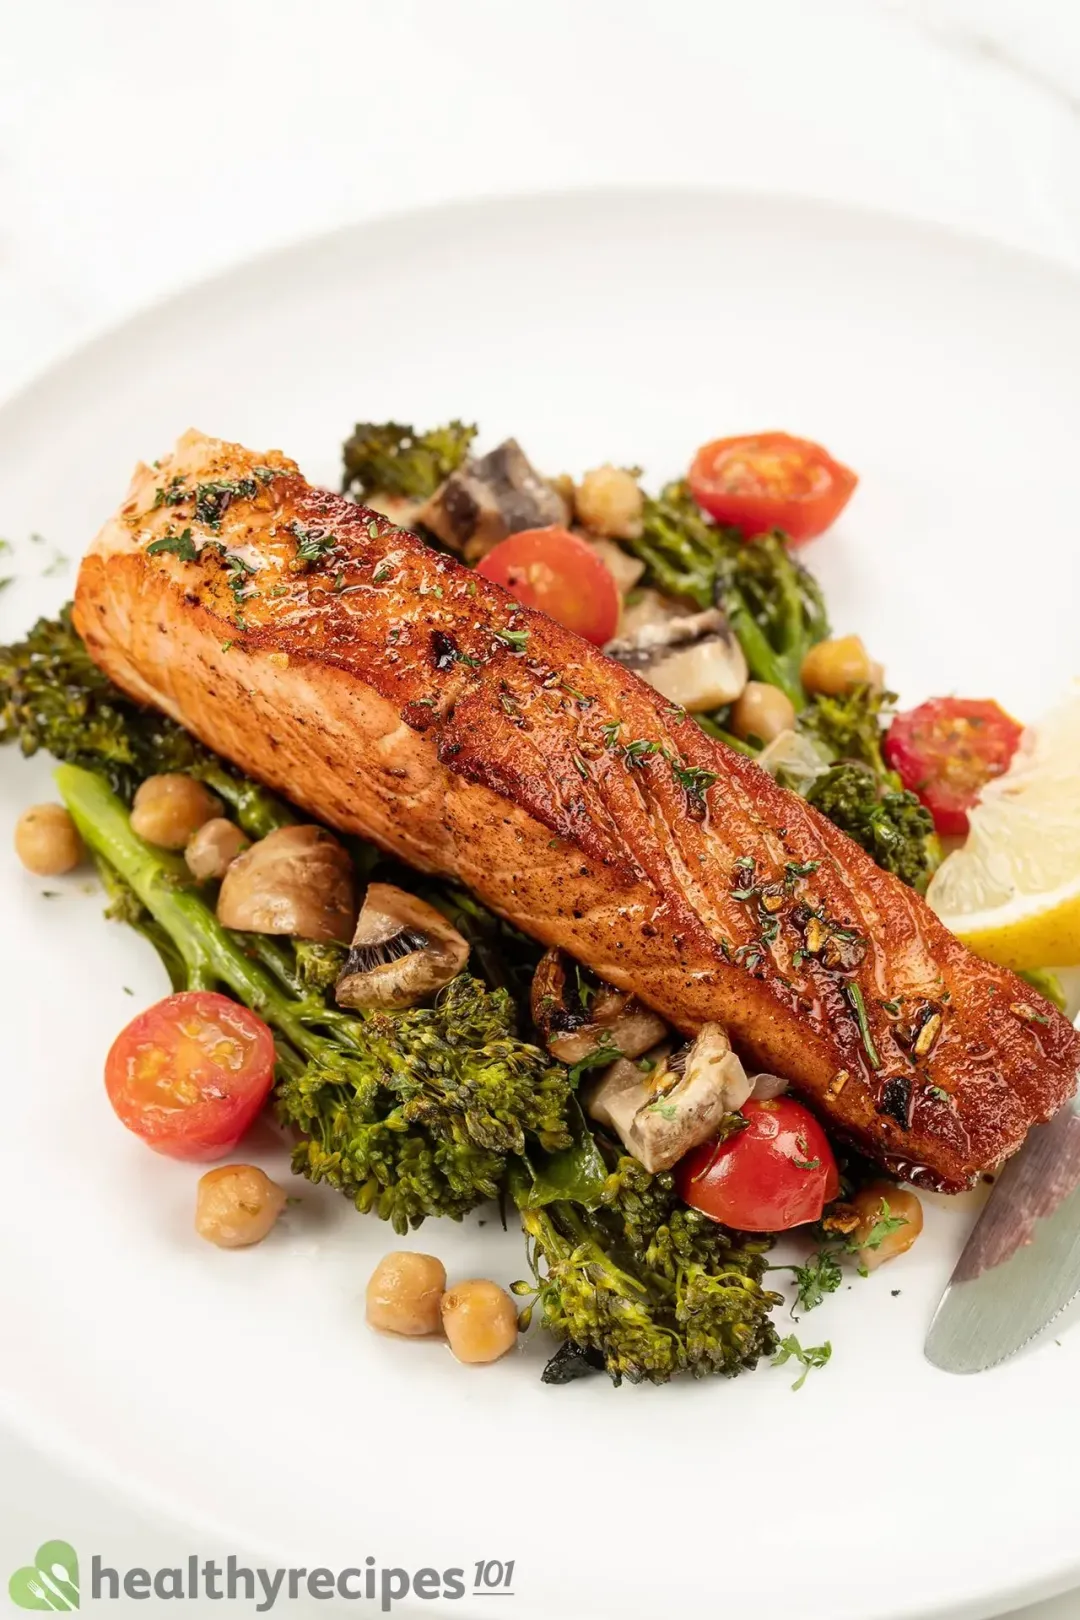 A white plate containing a pan-seared salmon fillet laid on a bed of broccolini, halved cherry tomatoes, cooked mushrooms, and chickpeas